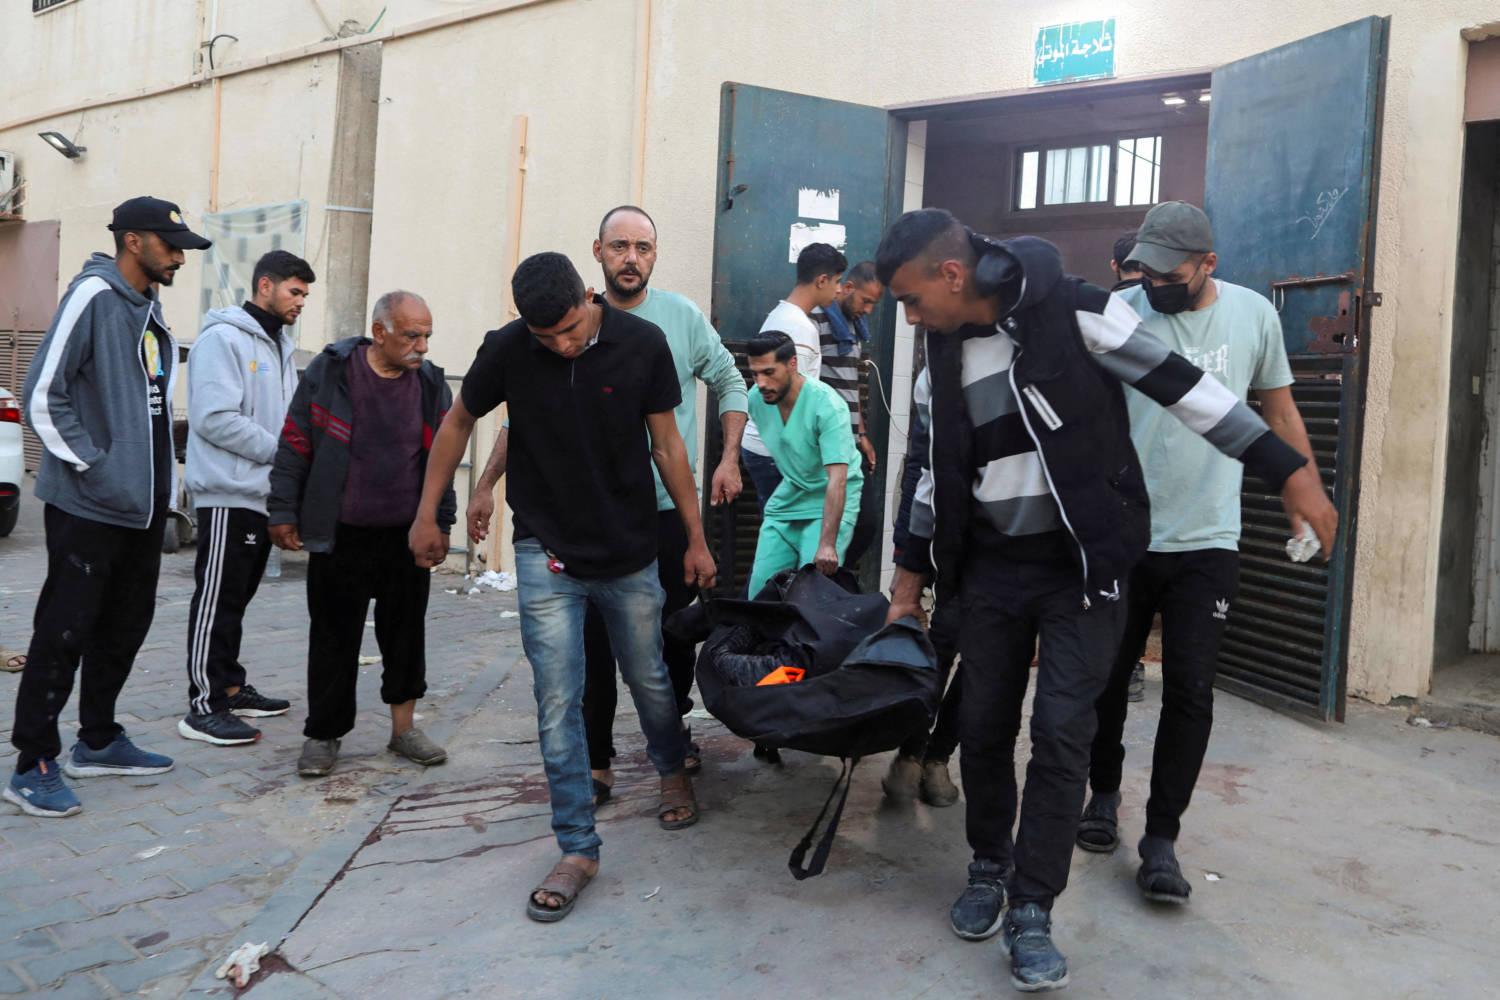 Palestinians Carry The Body Of A Foreign Employee From Wck At A Hospital In Deir Al Balah